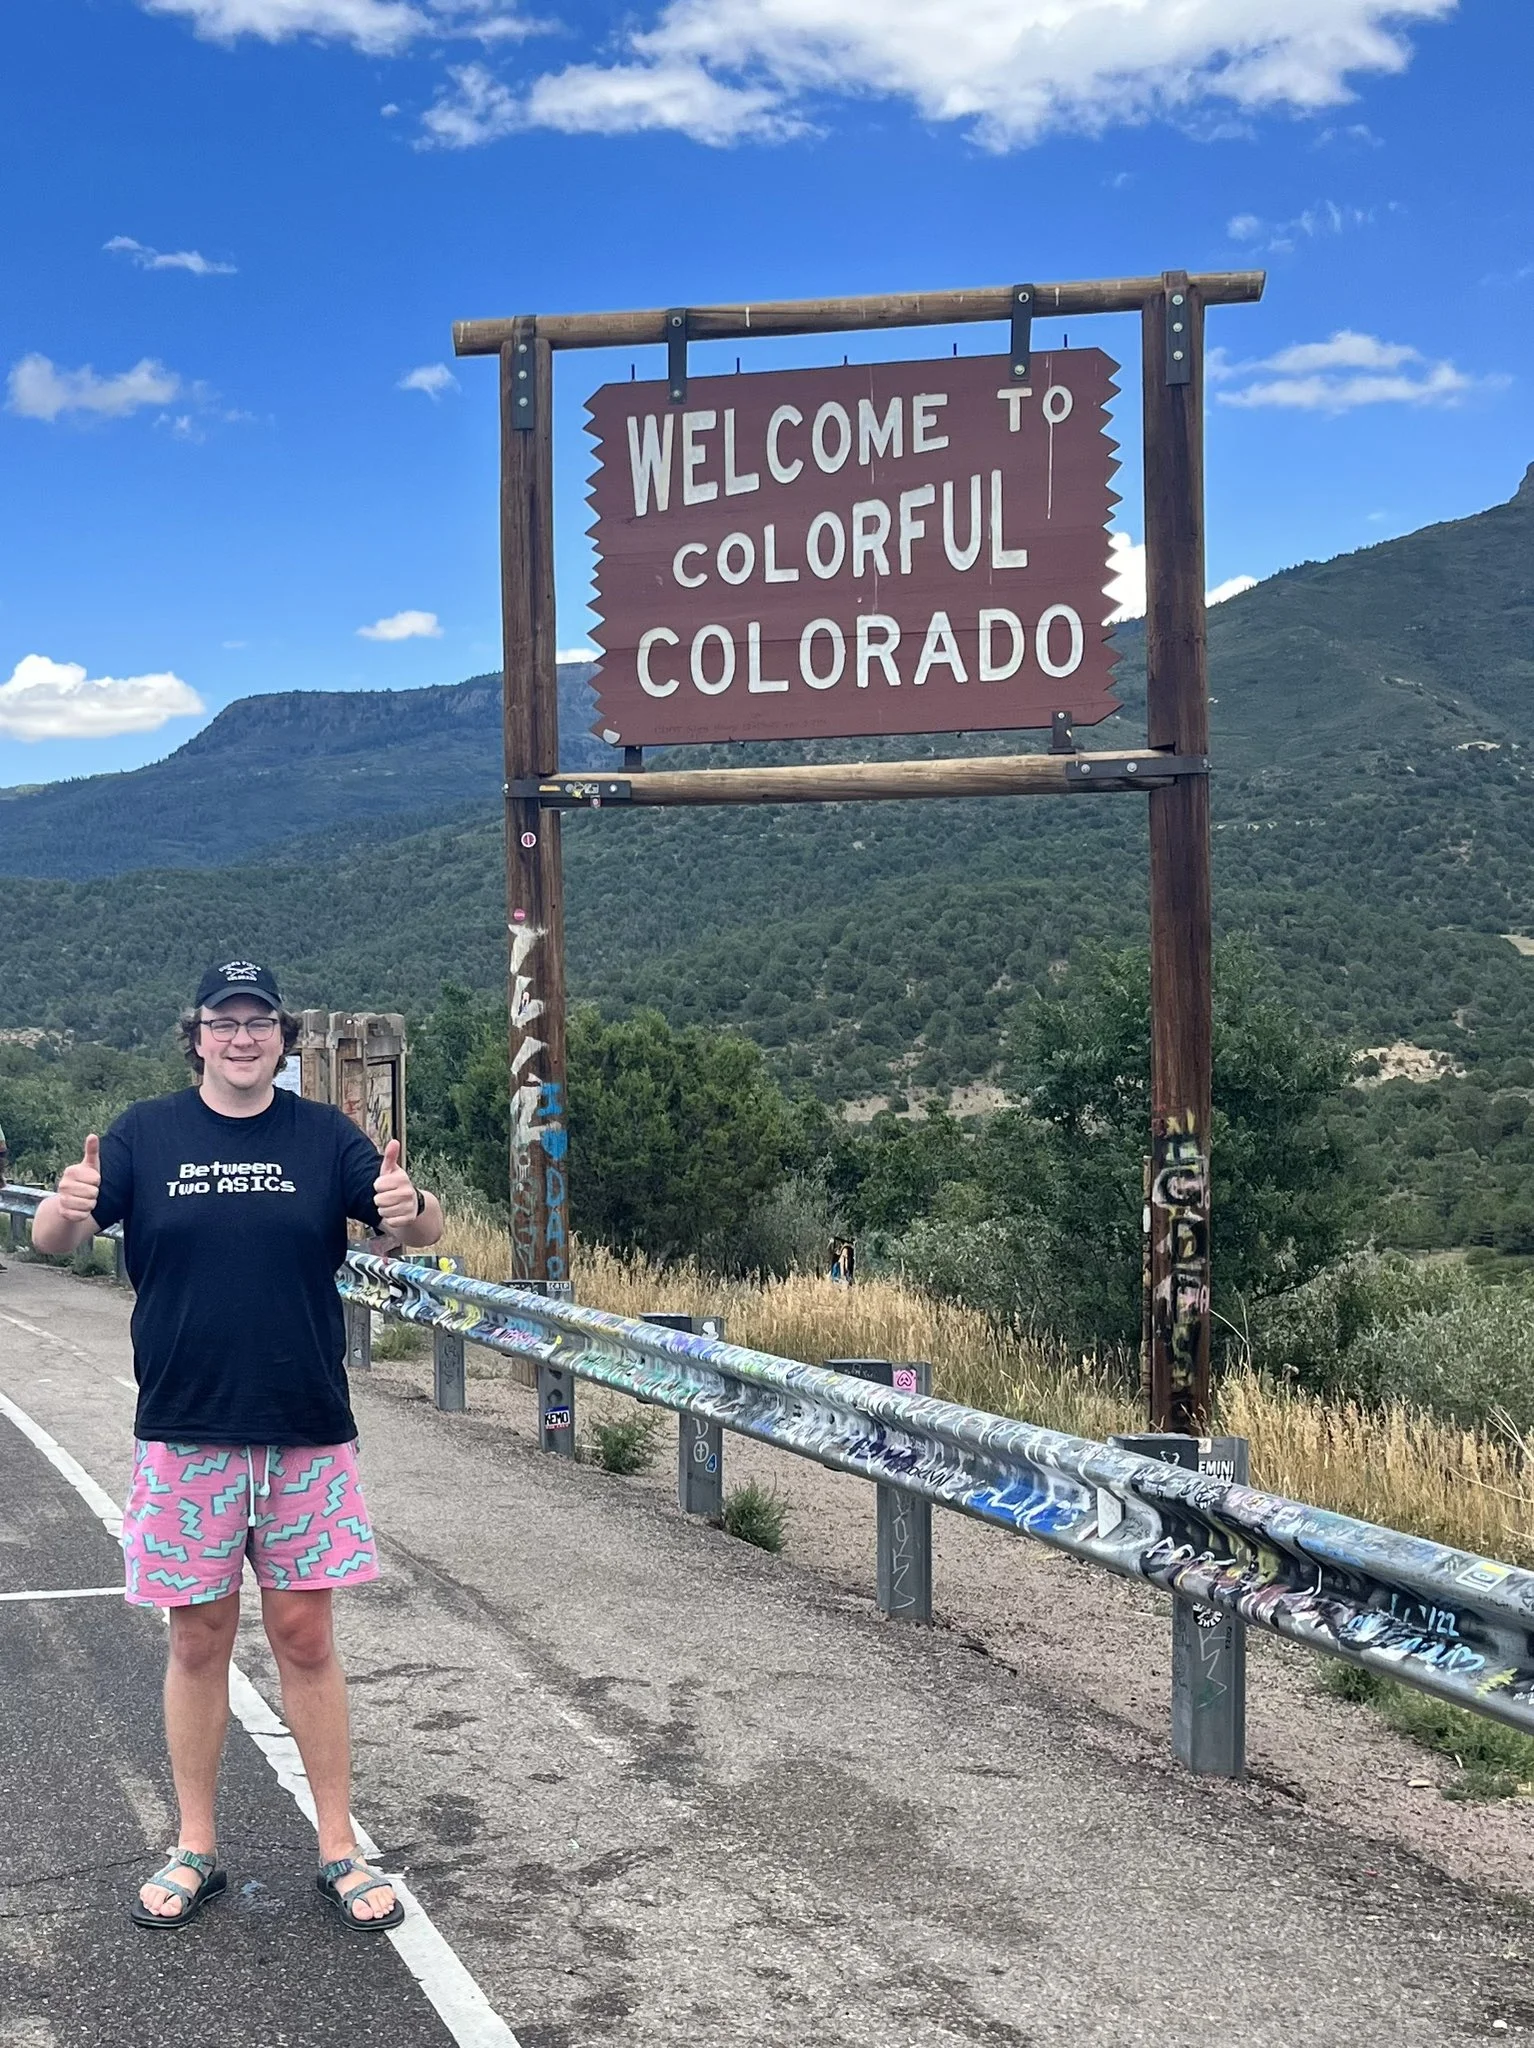 A man standing next to a 'Welcome to colorful Colorado' sign